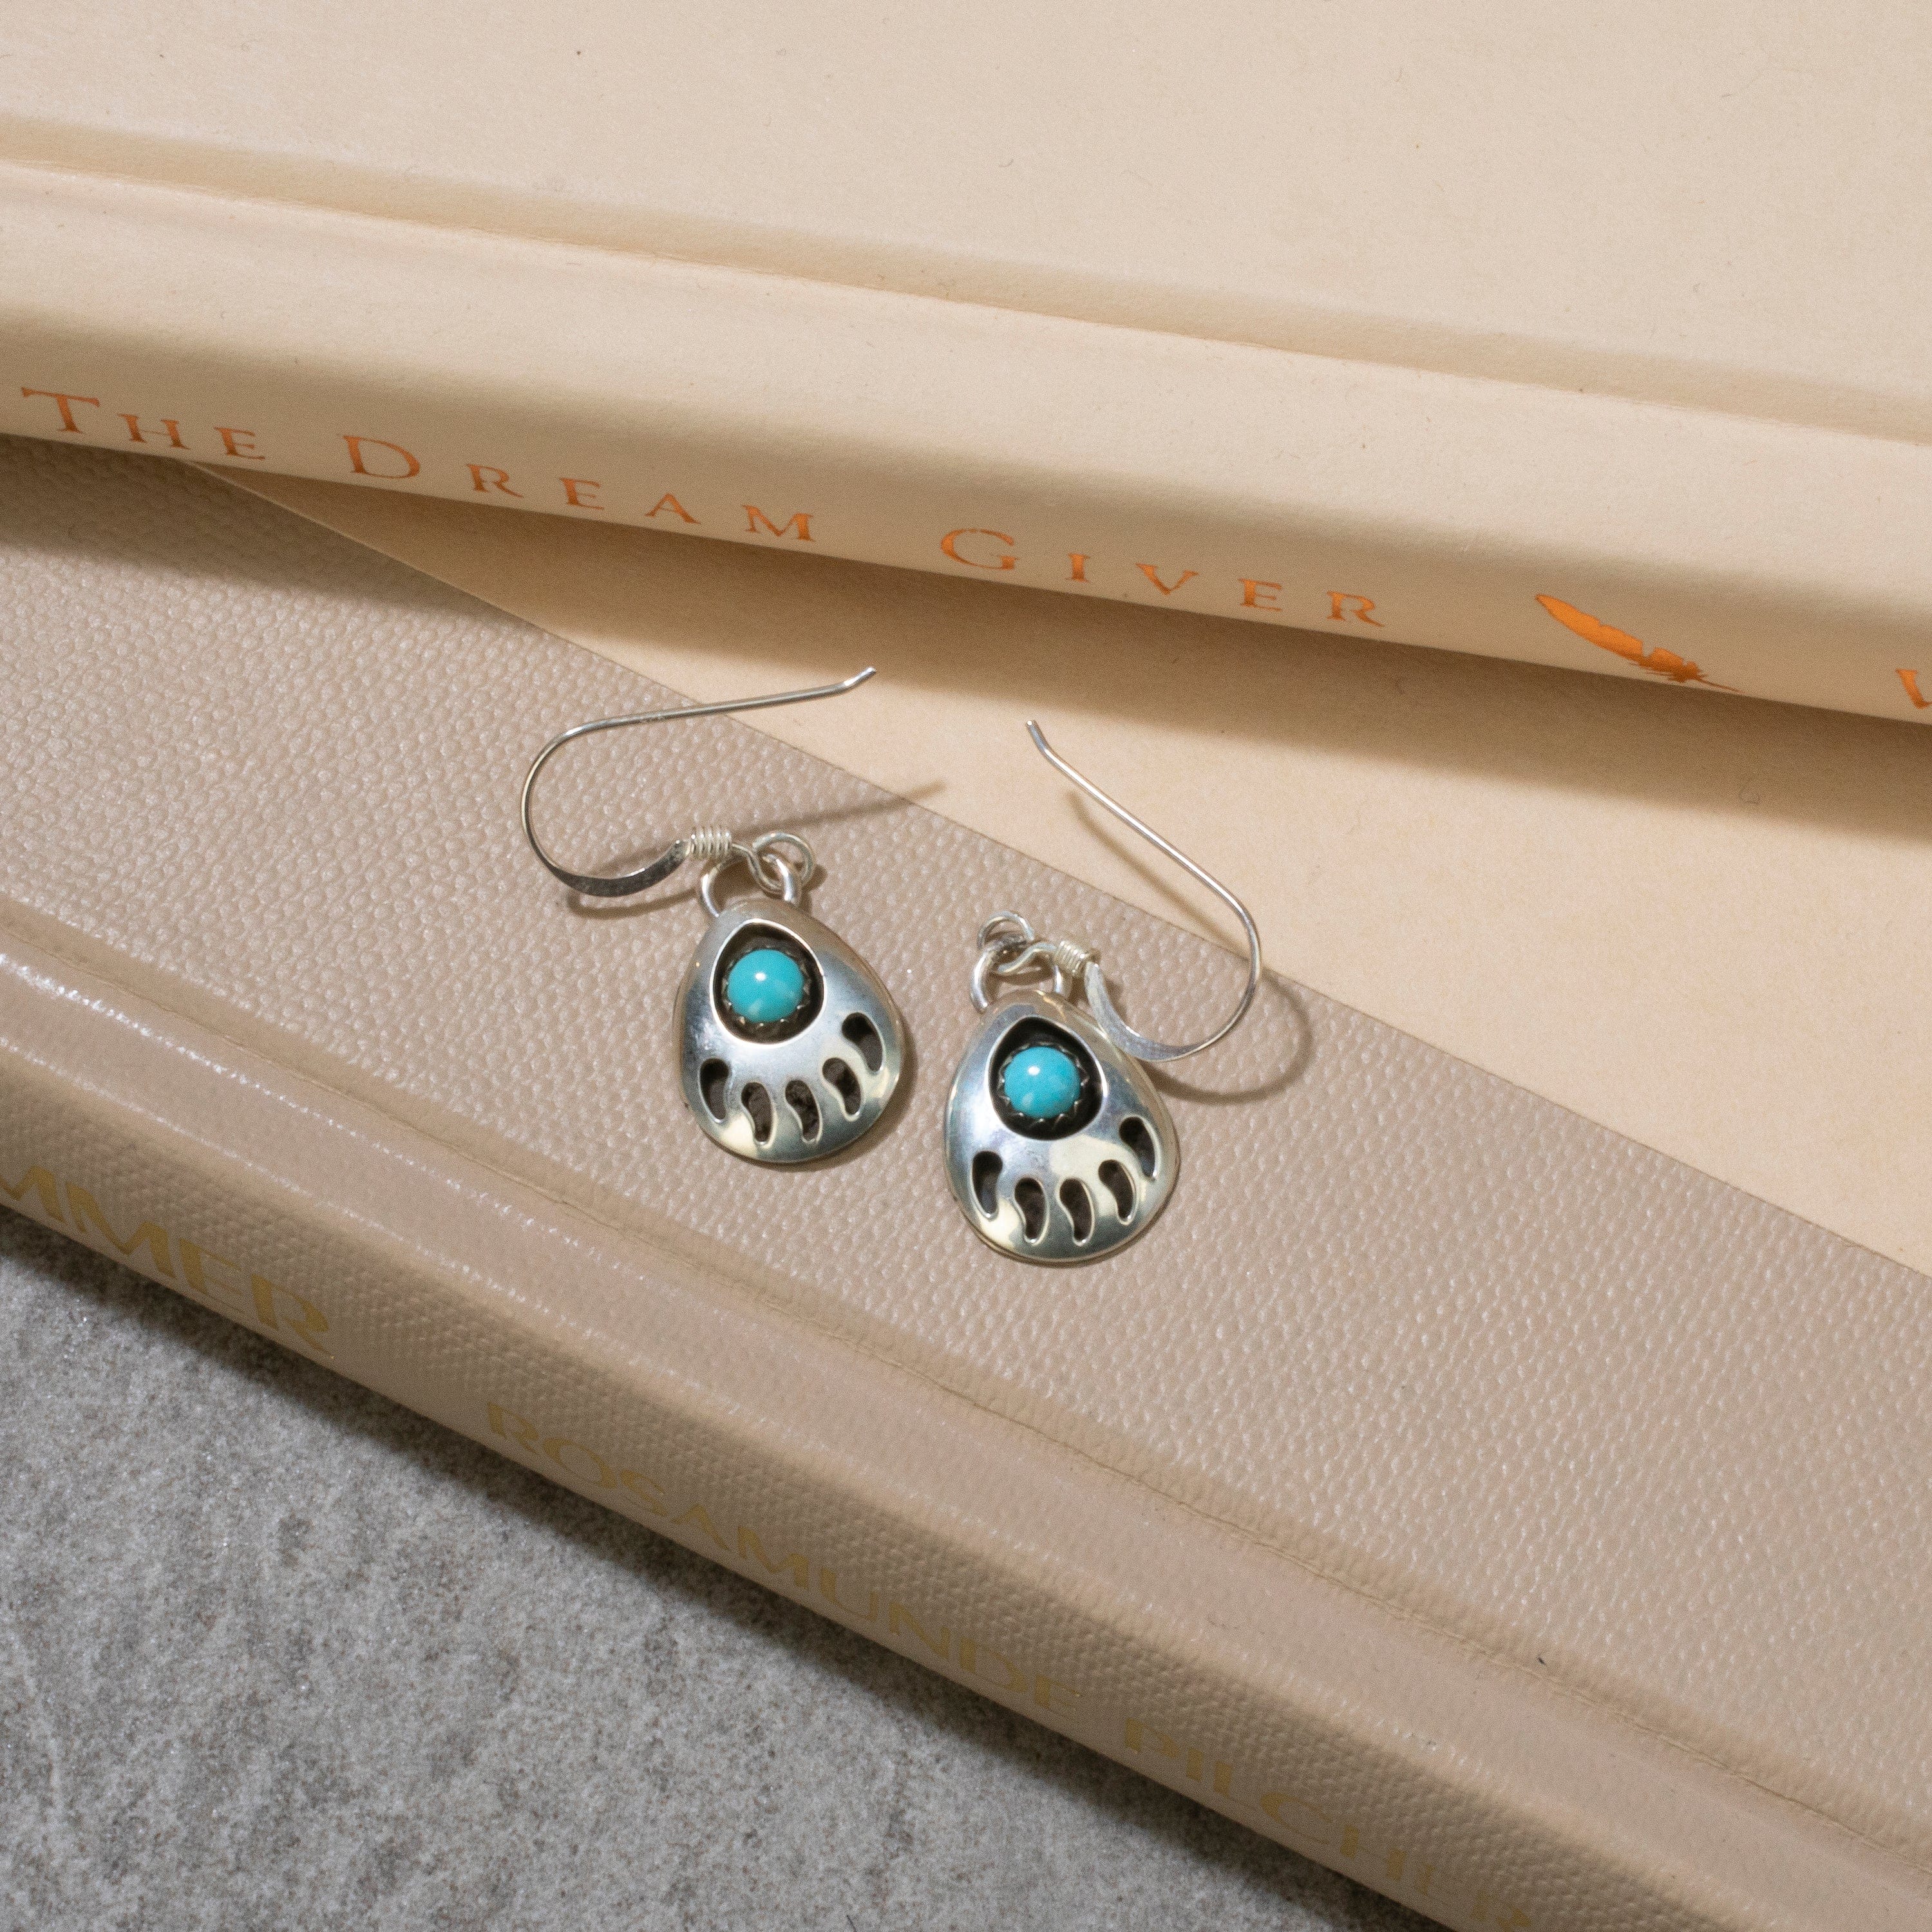 Kalifano Native American Jewelry Esther White Navajo Bear Claw with Turquoise USA Native American Made 925 Sterling Silver Earrings with French Hook NAE100.007